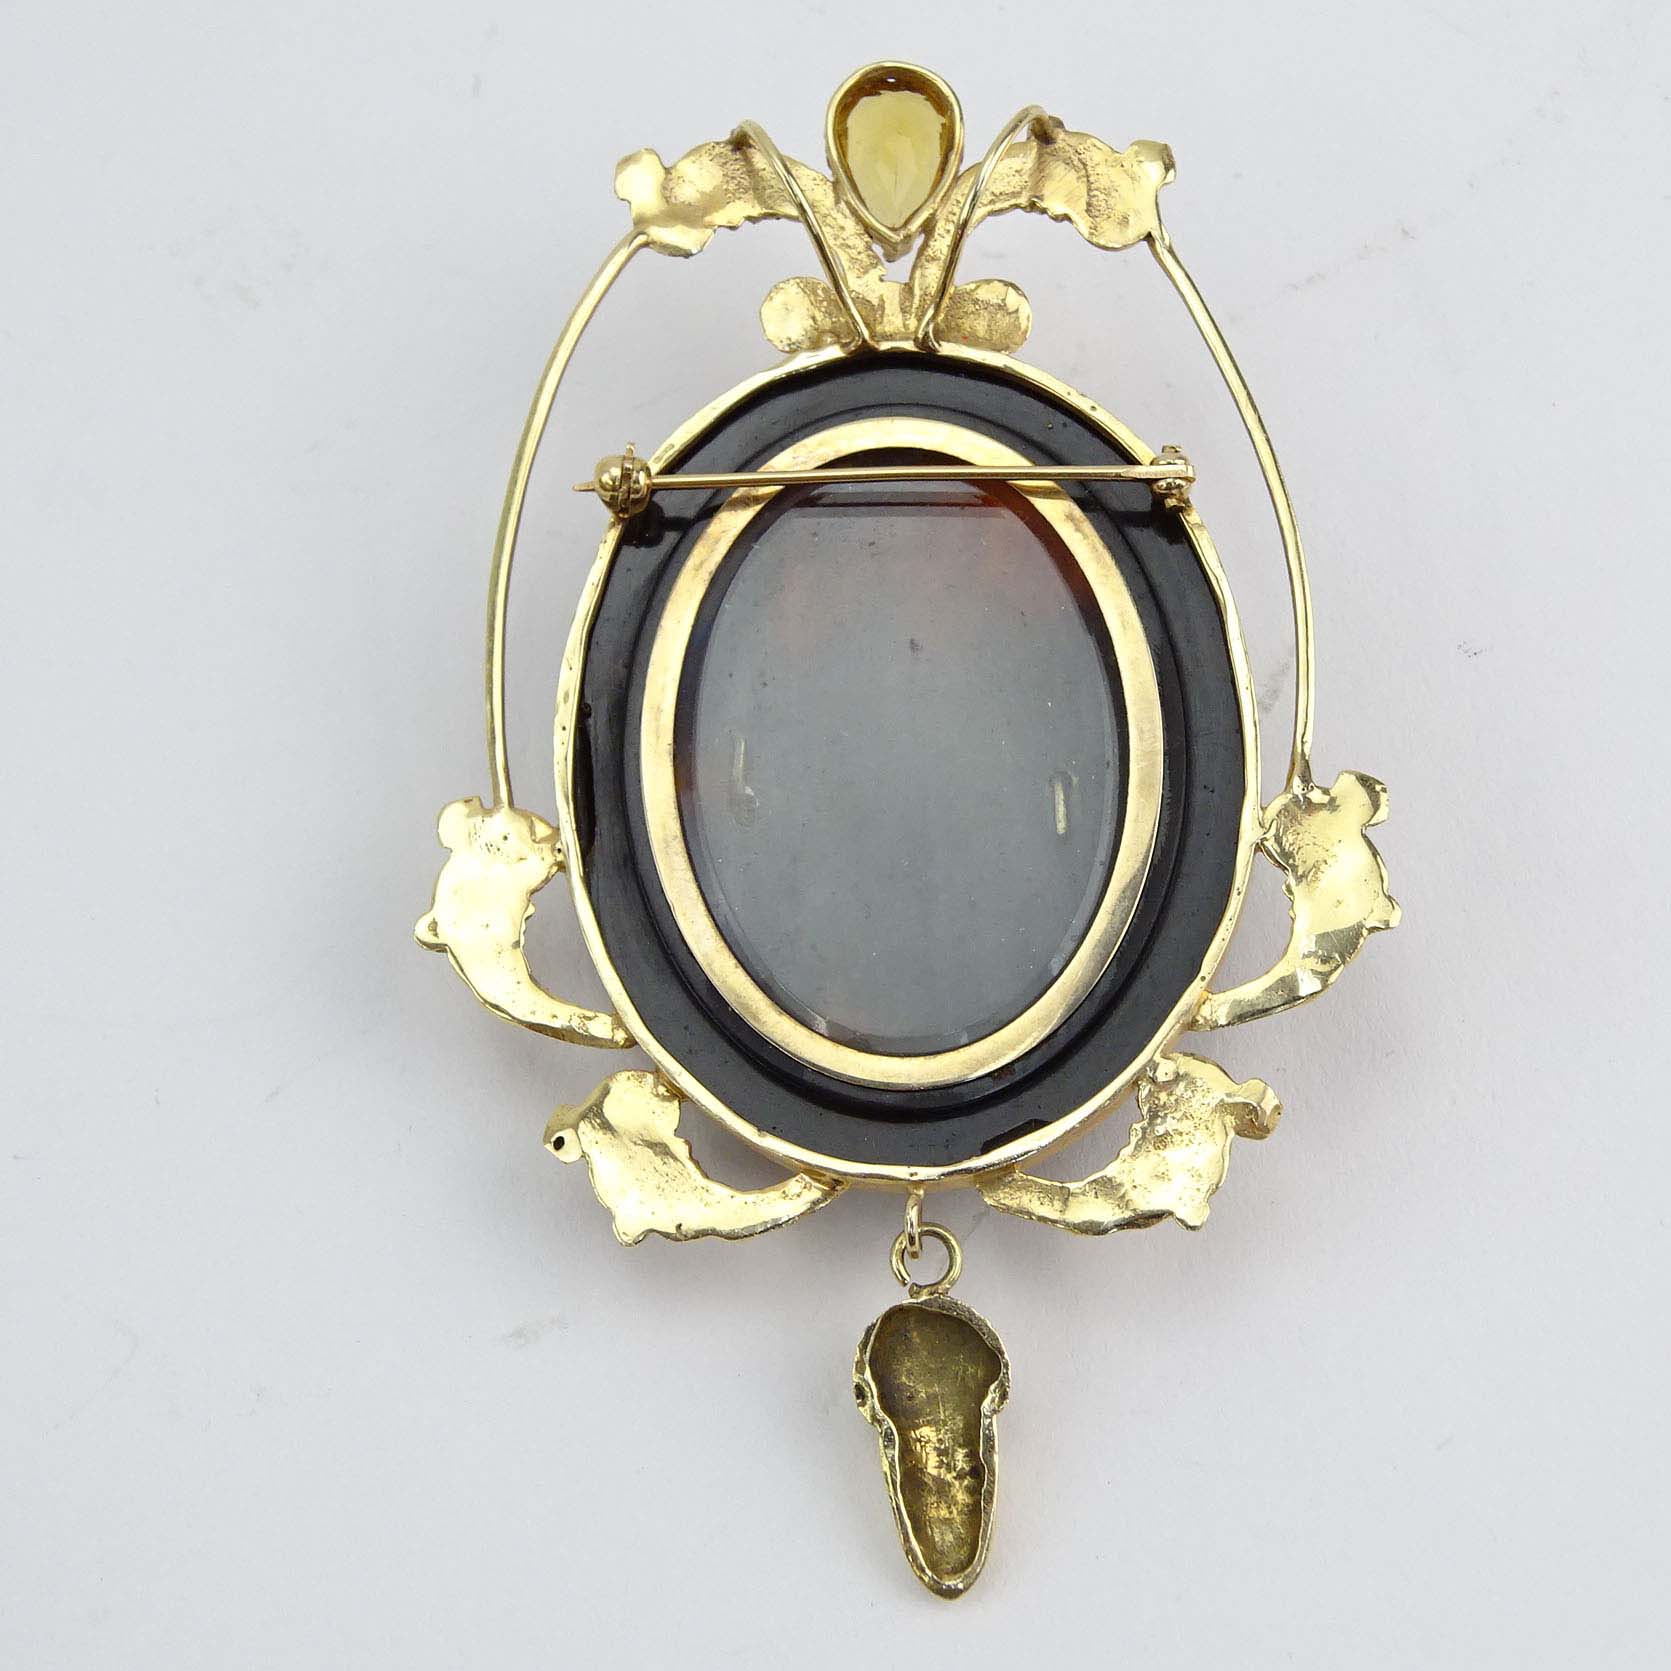 Victorian 14 Karat Yellow Gold and Tortoise Shell Pendant/Brooch with Citrine and Diamond Accents.